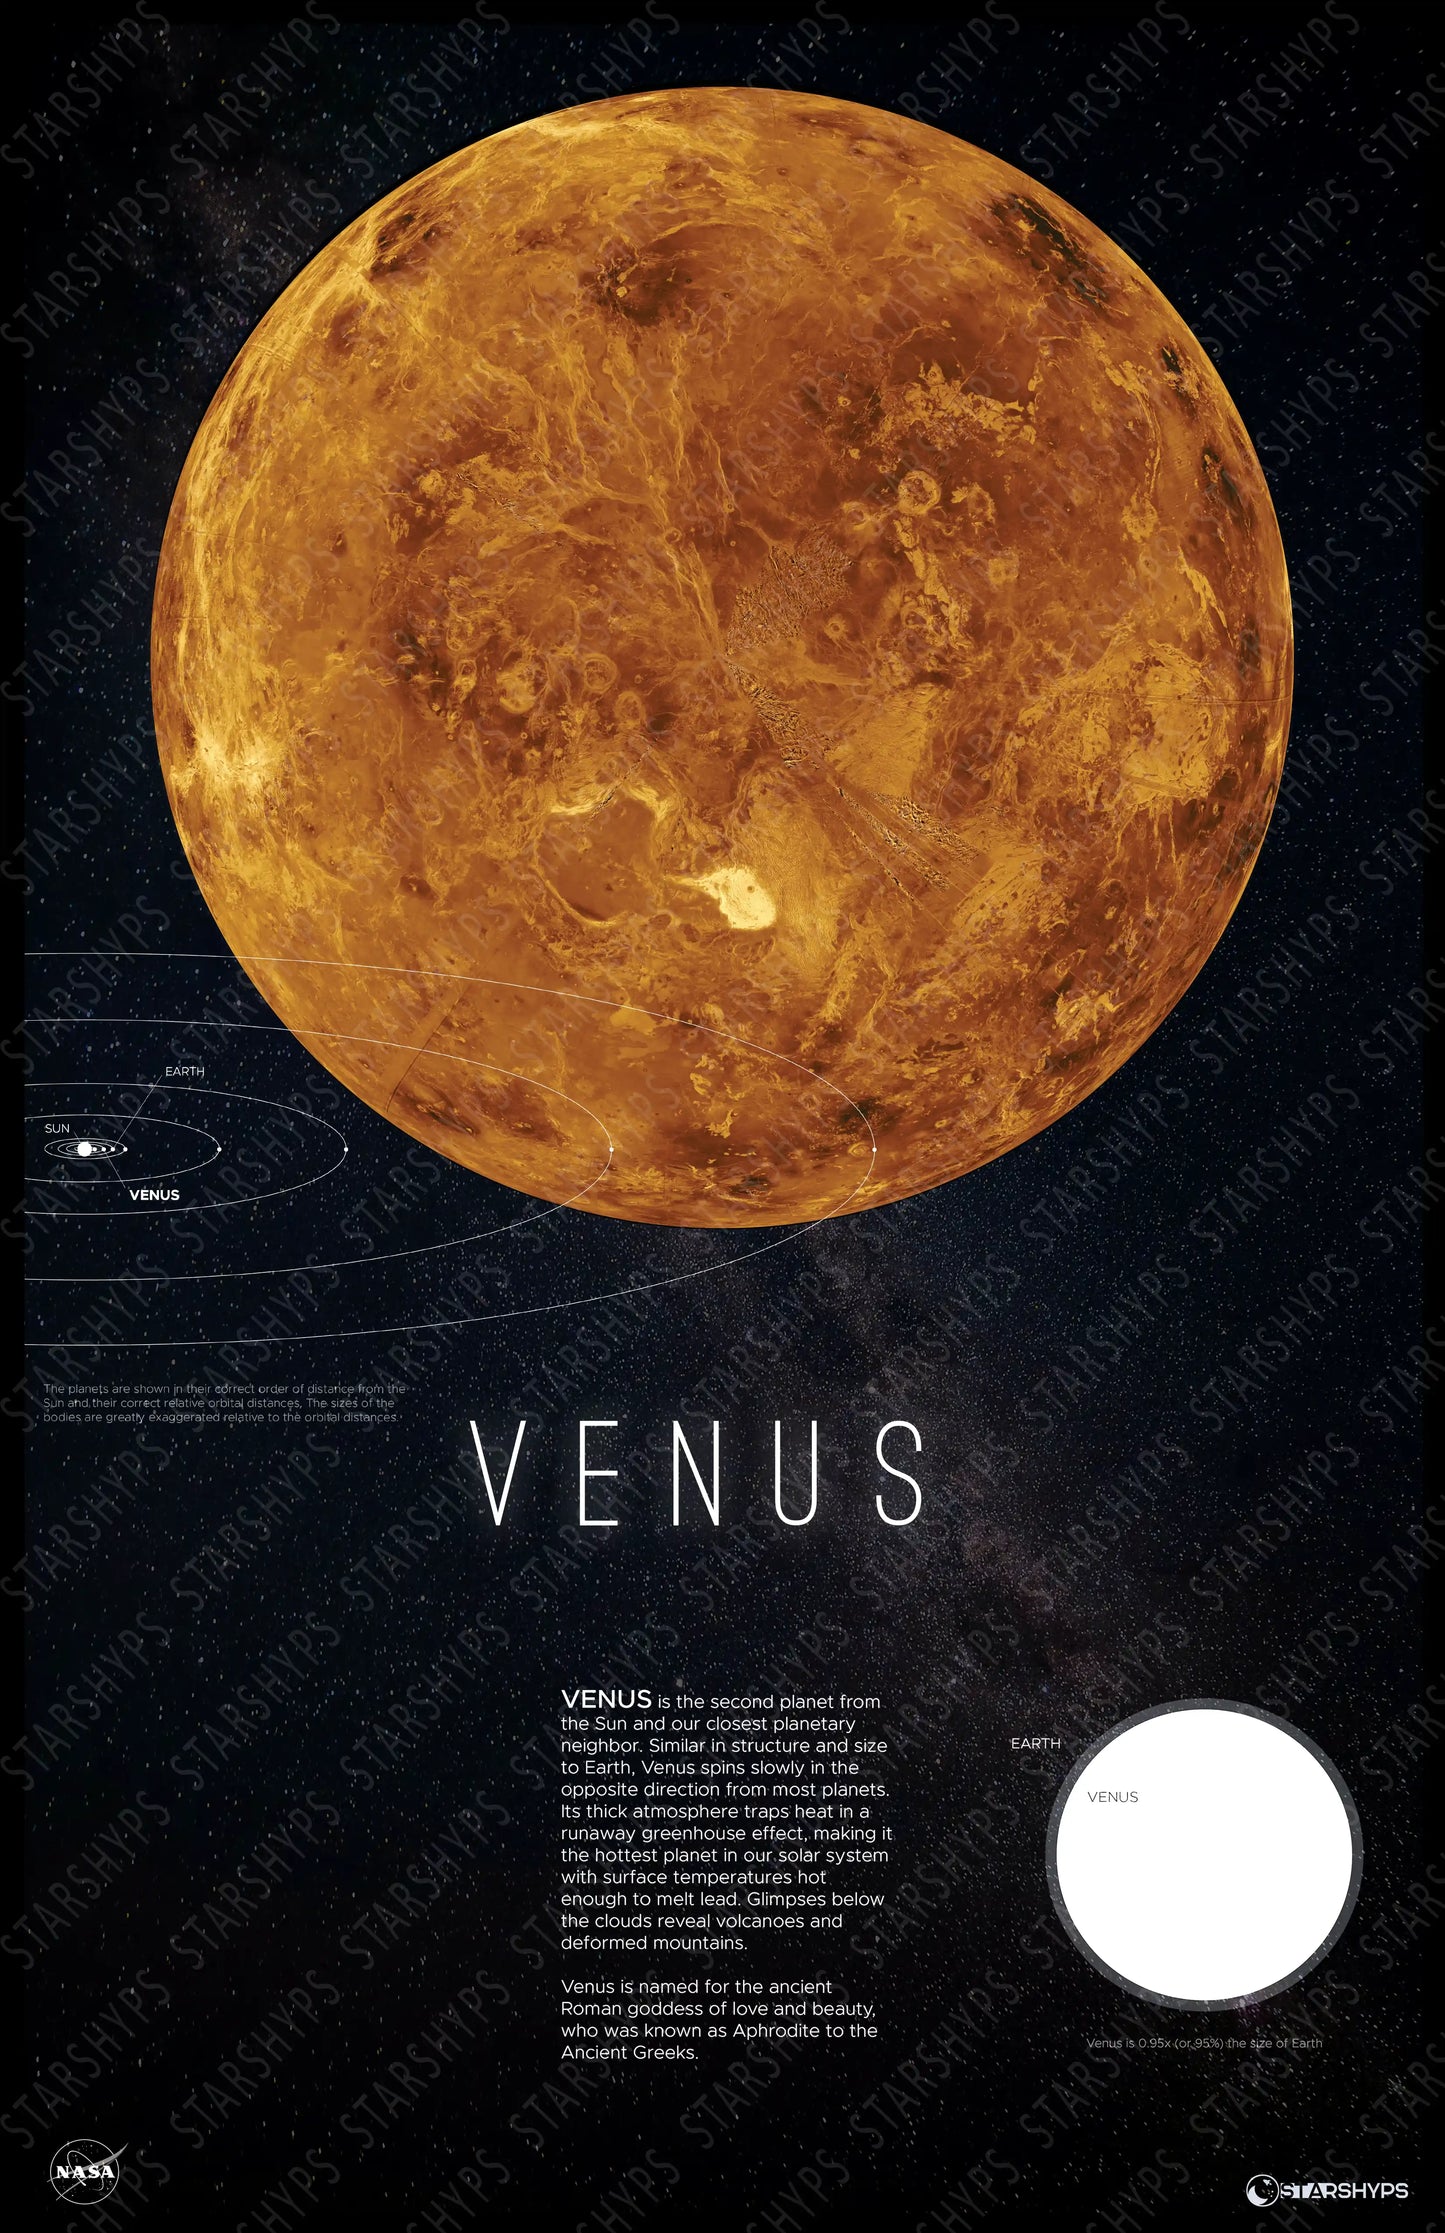 Venus Orbit Print | Venusian Veil Decor | Rocket Blueprint Posters | A detailed poster of Venus, with its brown and orange surface features. The poster includes the planet's name "VENUS" and an informational paragraph below the image, set against a starry background.